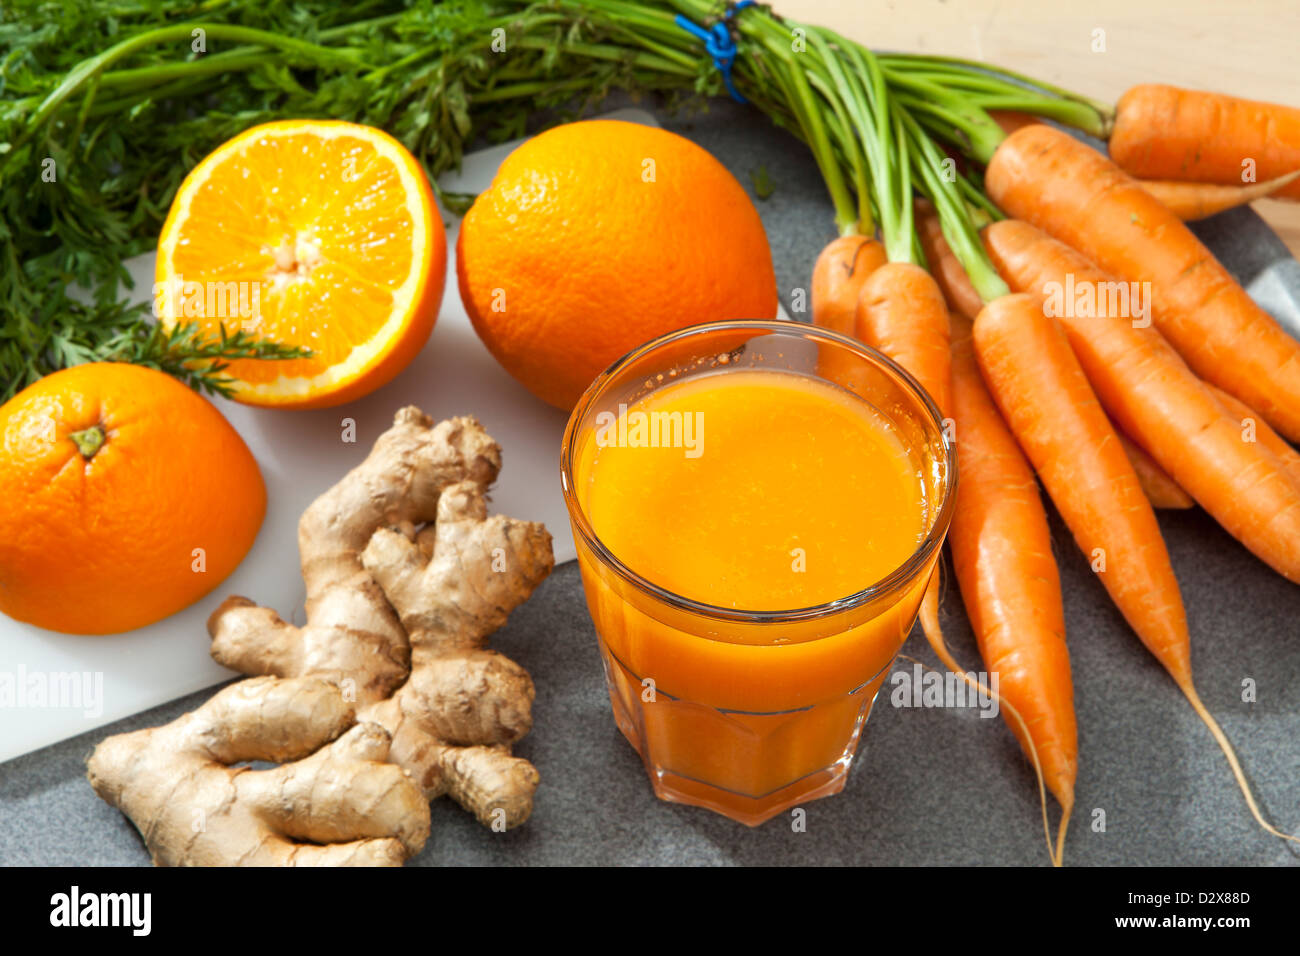 Glass of fruit juice with orange, carrots and ginger on a cutting board Stock Photo